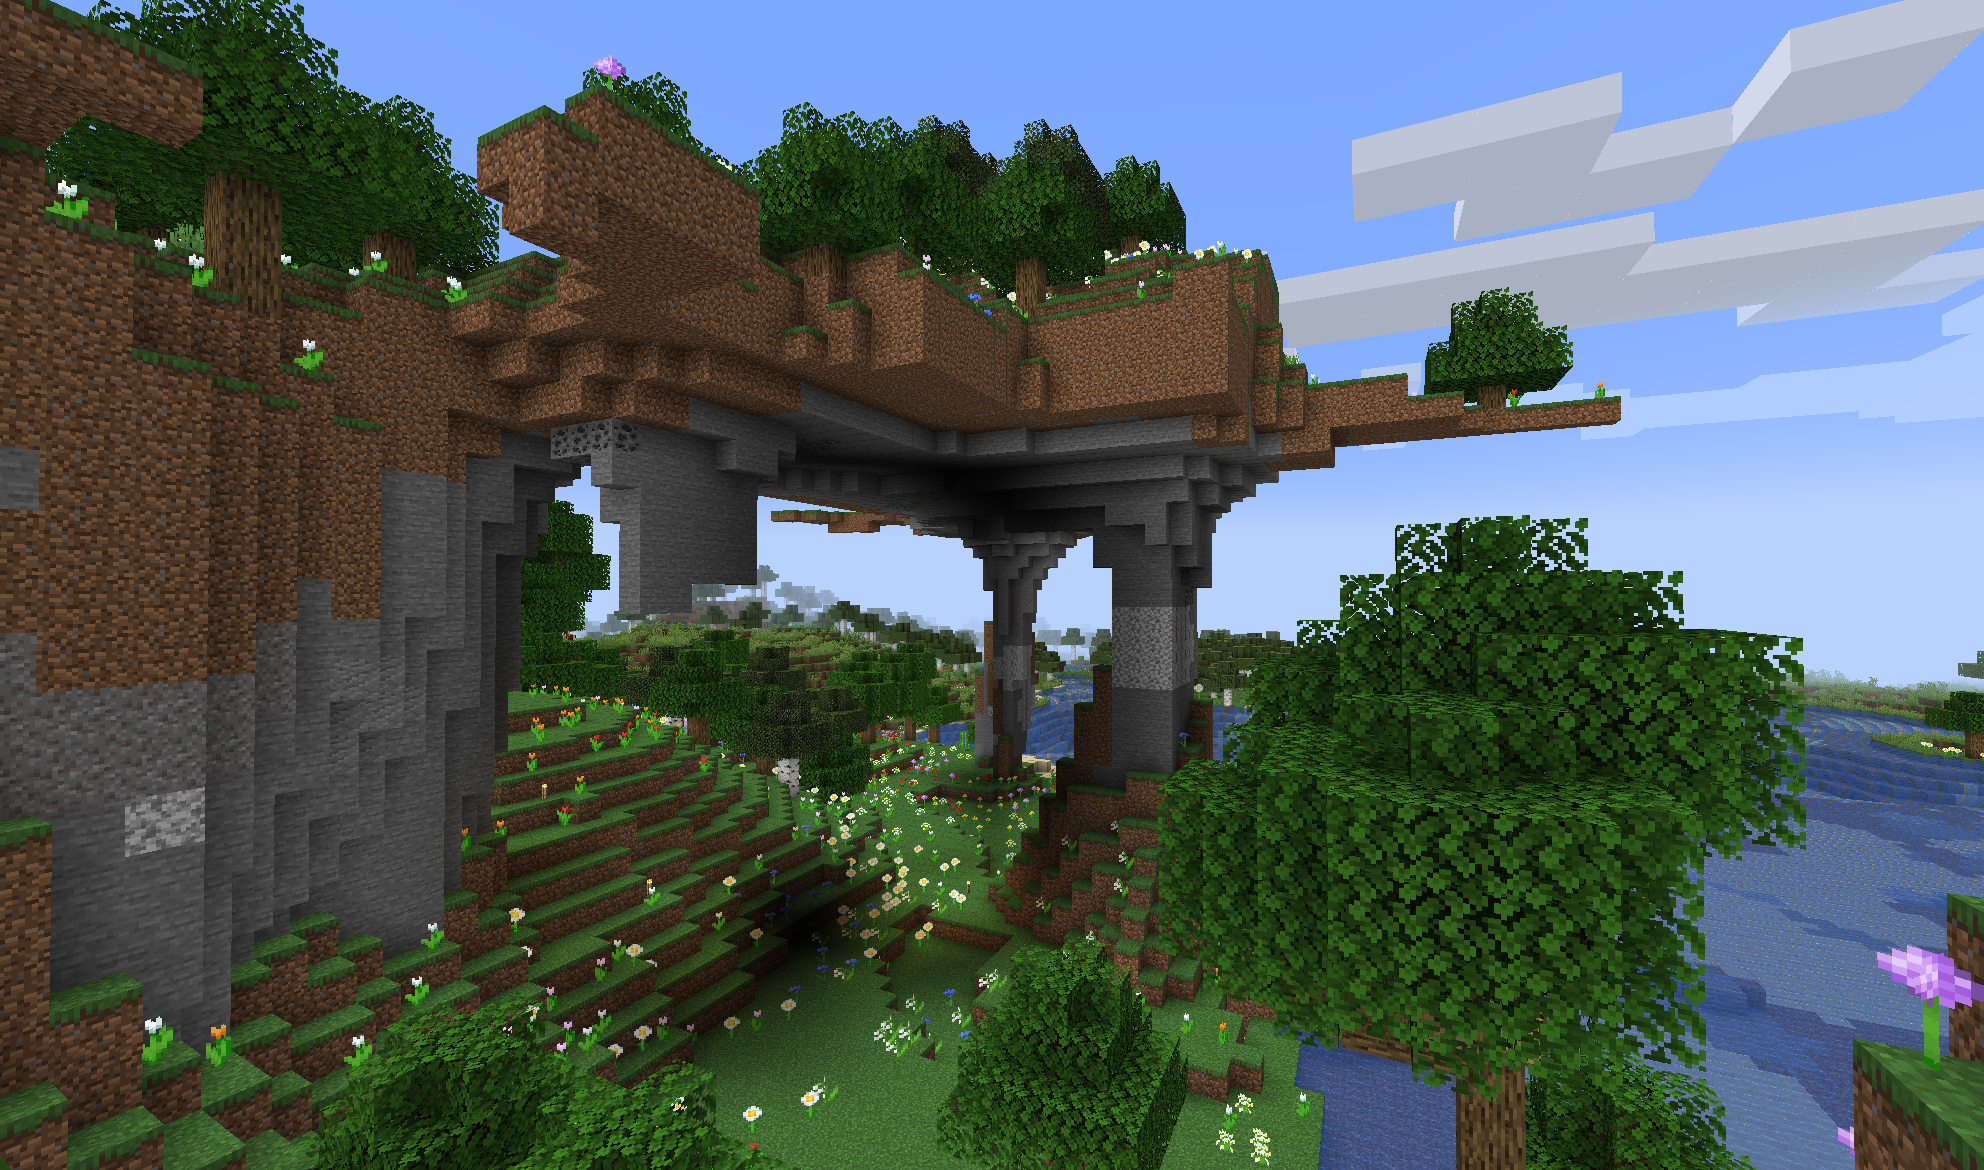 A randomly-generated Minecraft mountain. Screenshot captured by Quint Iverson.